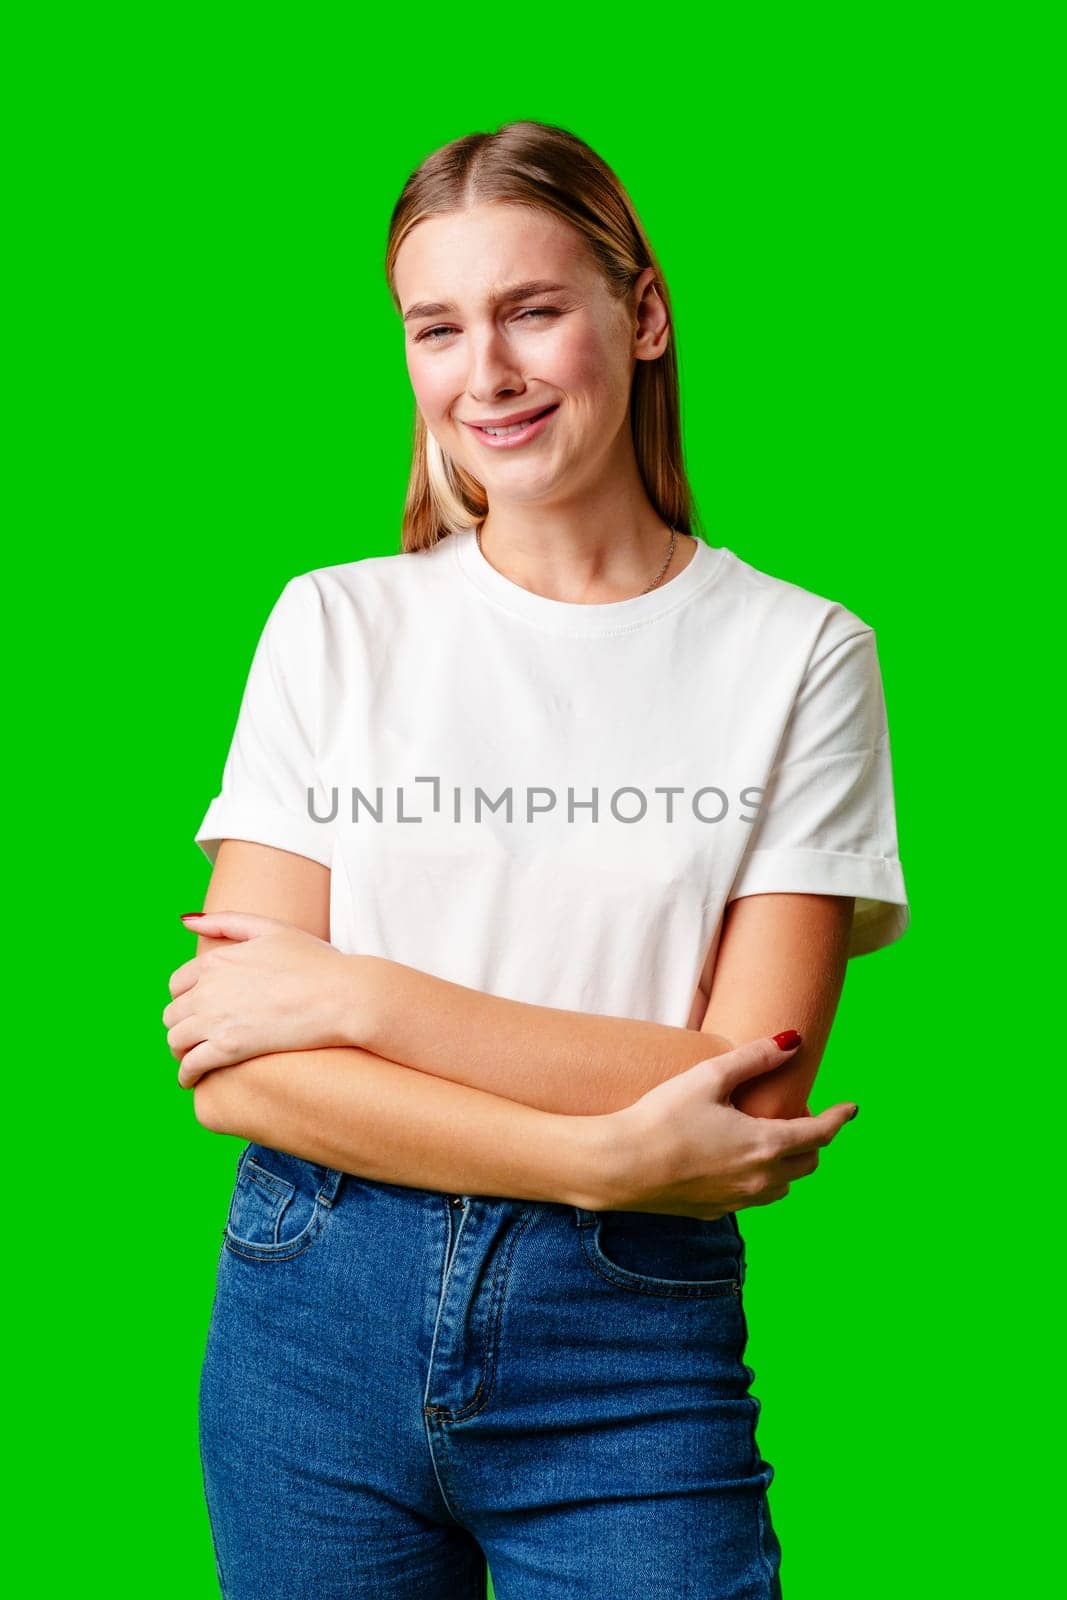 Portrait of an upset young casual girl against green background by Fabrikasimf